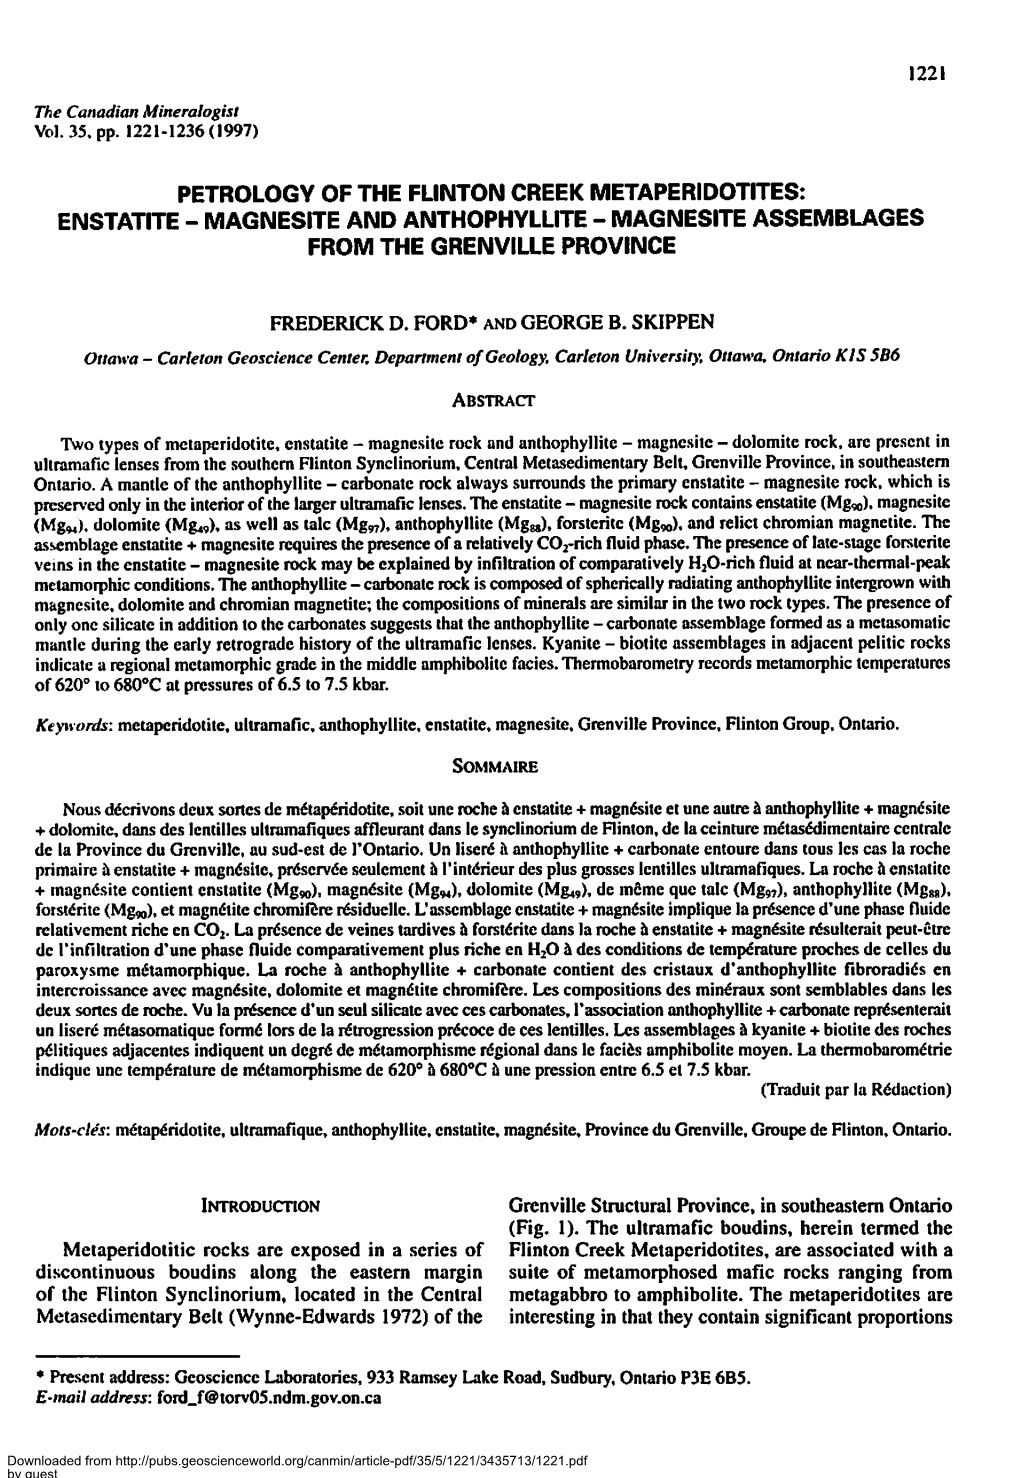 Enstatite - Magnesite and Anthophyllite - Magnesite Assemblages from the Grenville Province